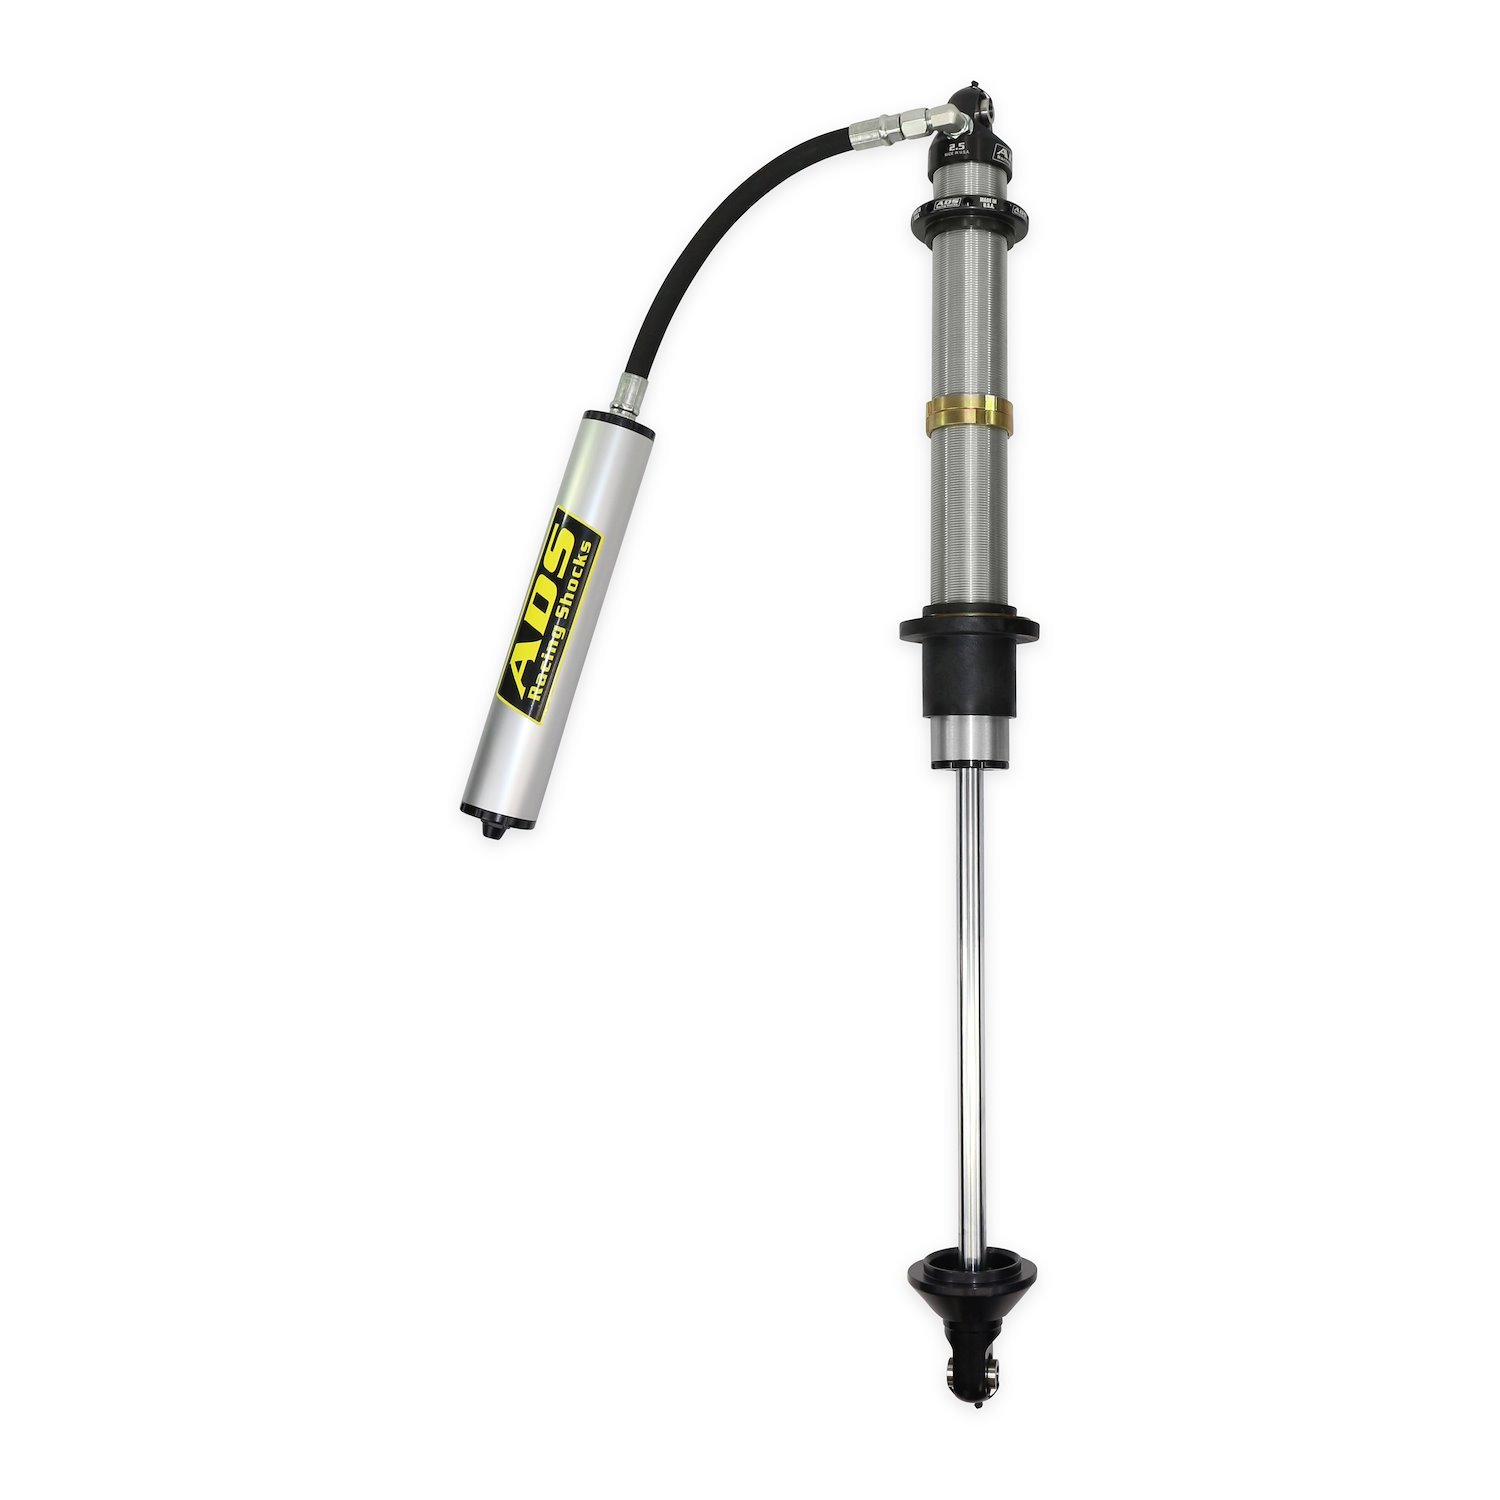 250-COS12-0A9 Coil-Over Race Shock, 2.5 in. x 12 in. Stroke, w/ Remote Reservoir (90-Degree Hose), w/ Compression Adjustment